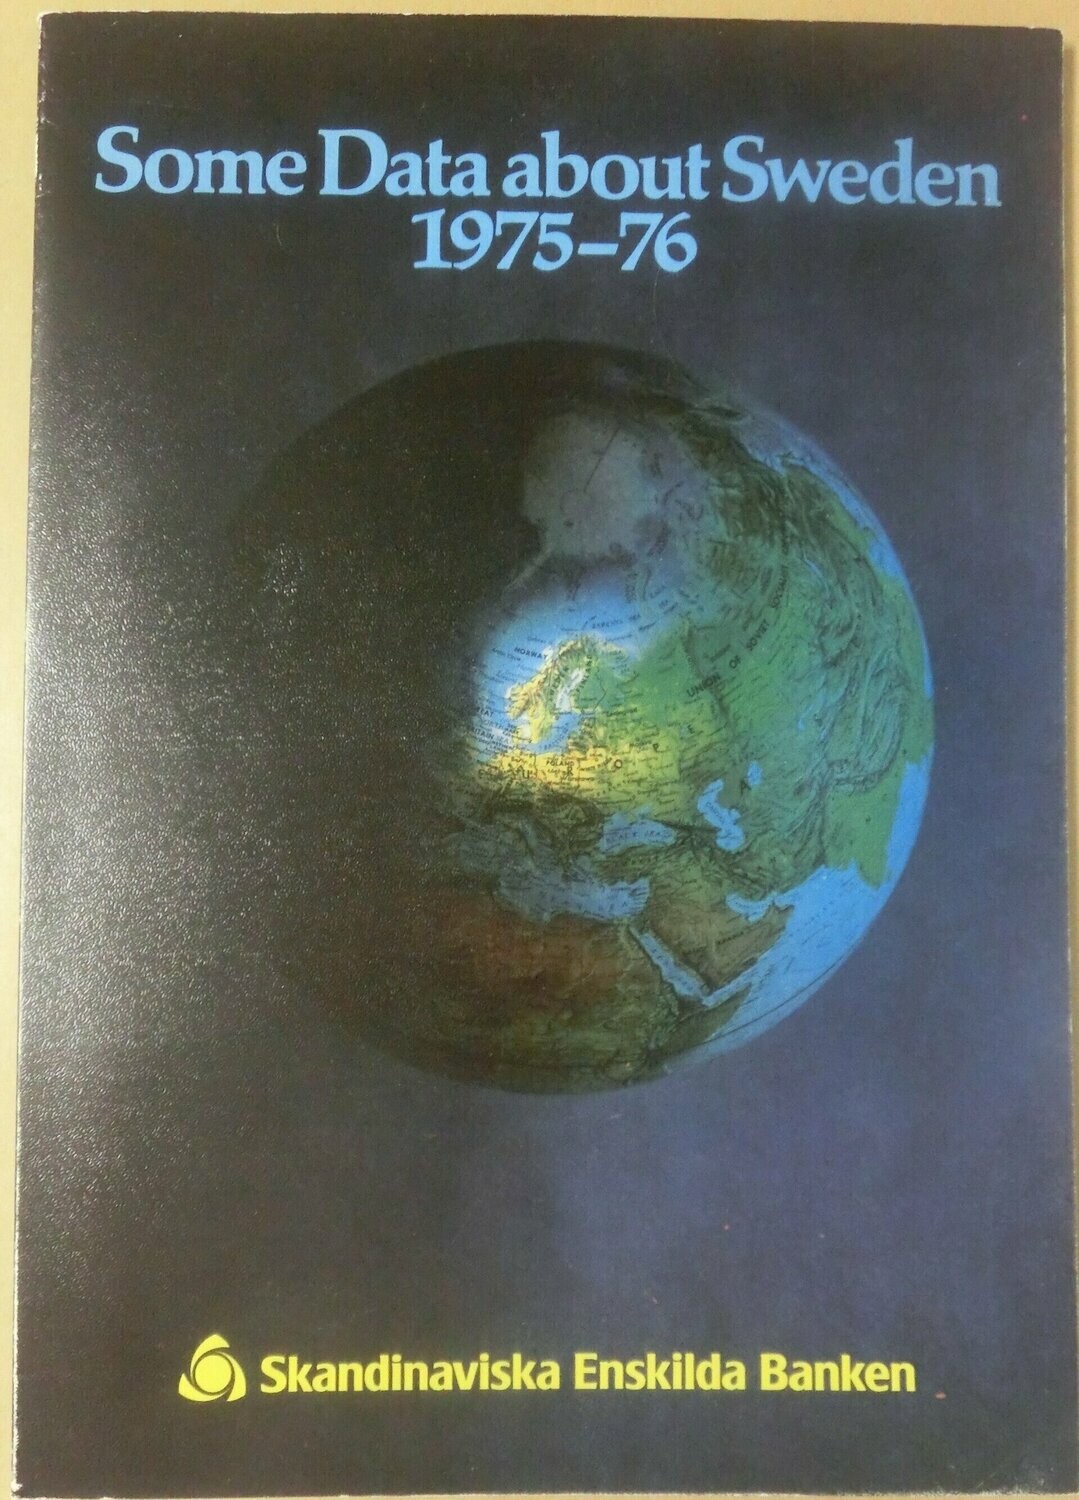 Some data about Sweden 1975-76